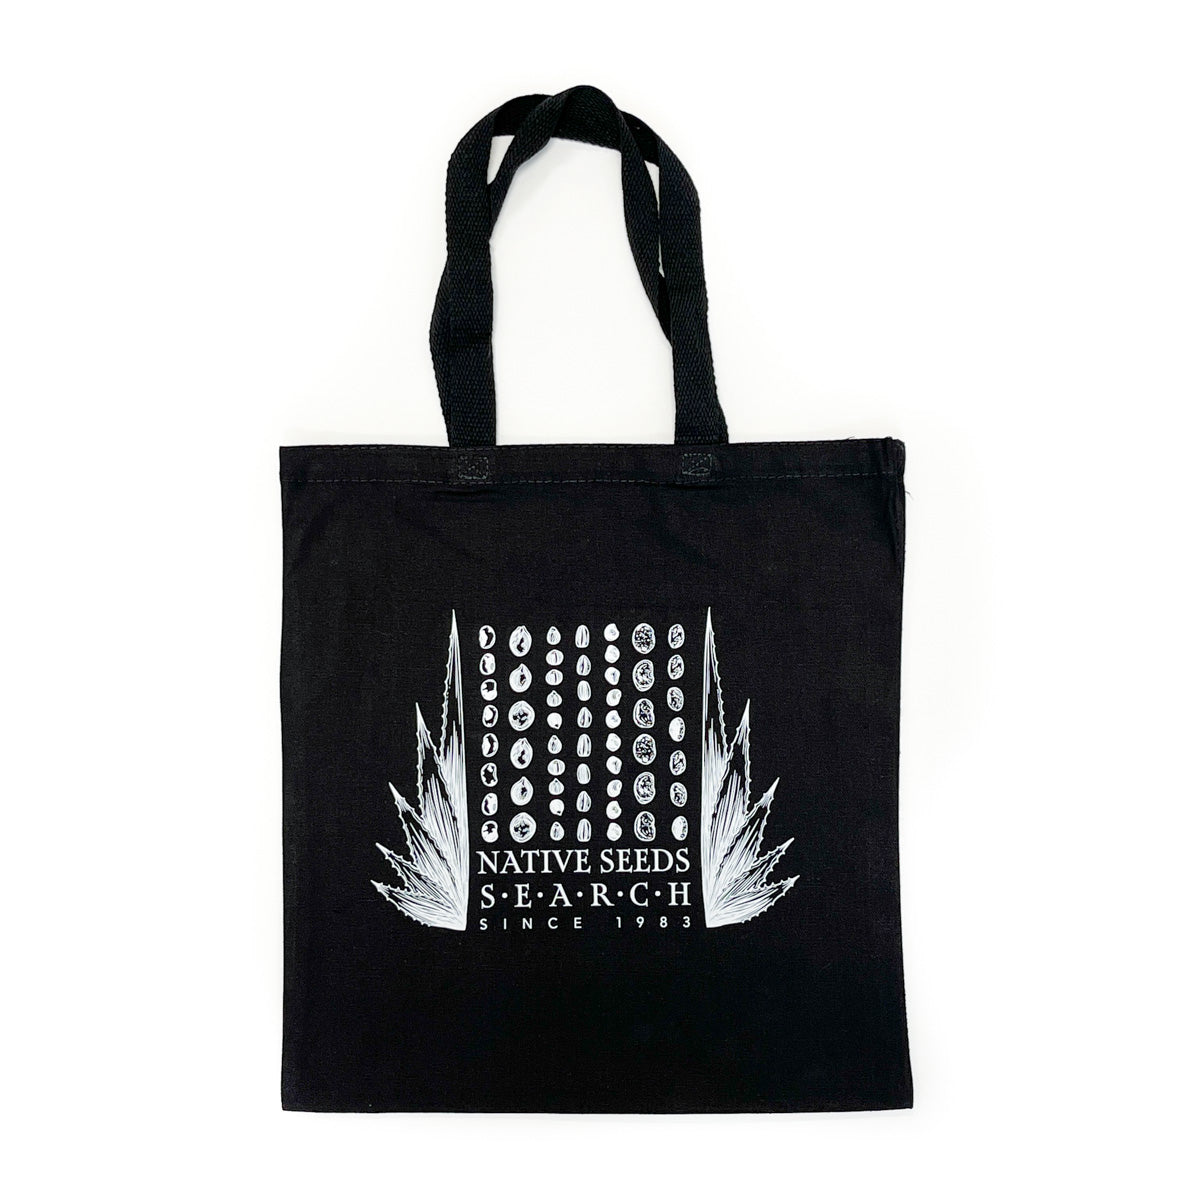 Native Seeds/SEARCH Black & White Tote Bag - SPECIAL EDITION